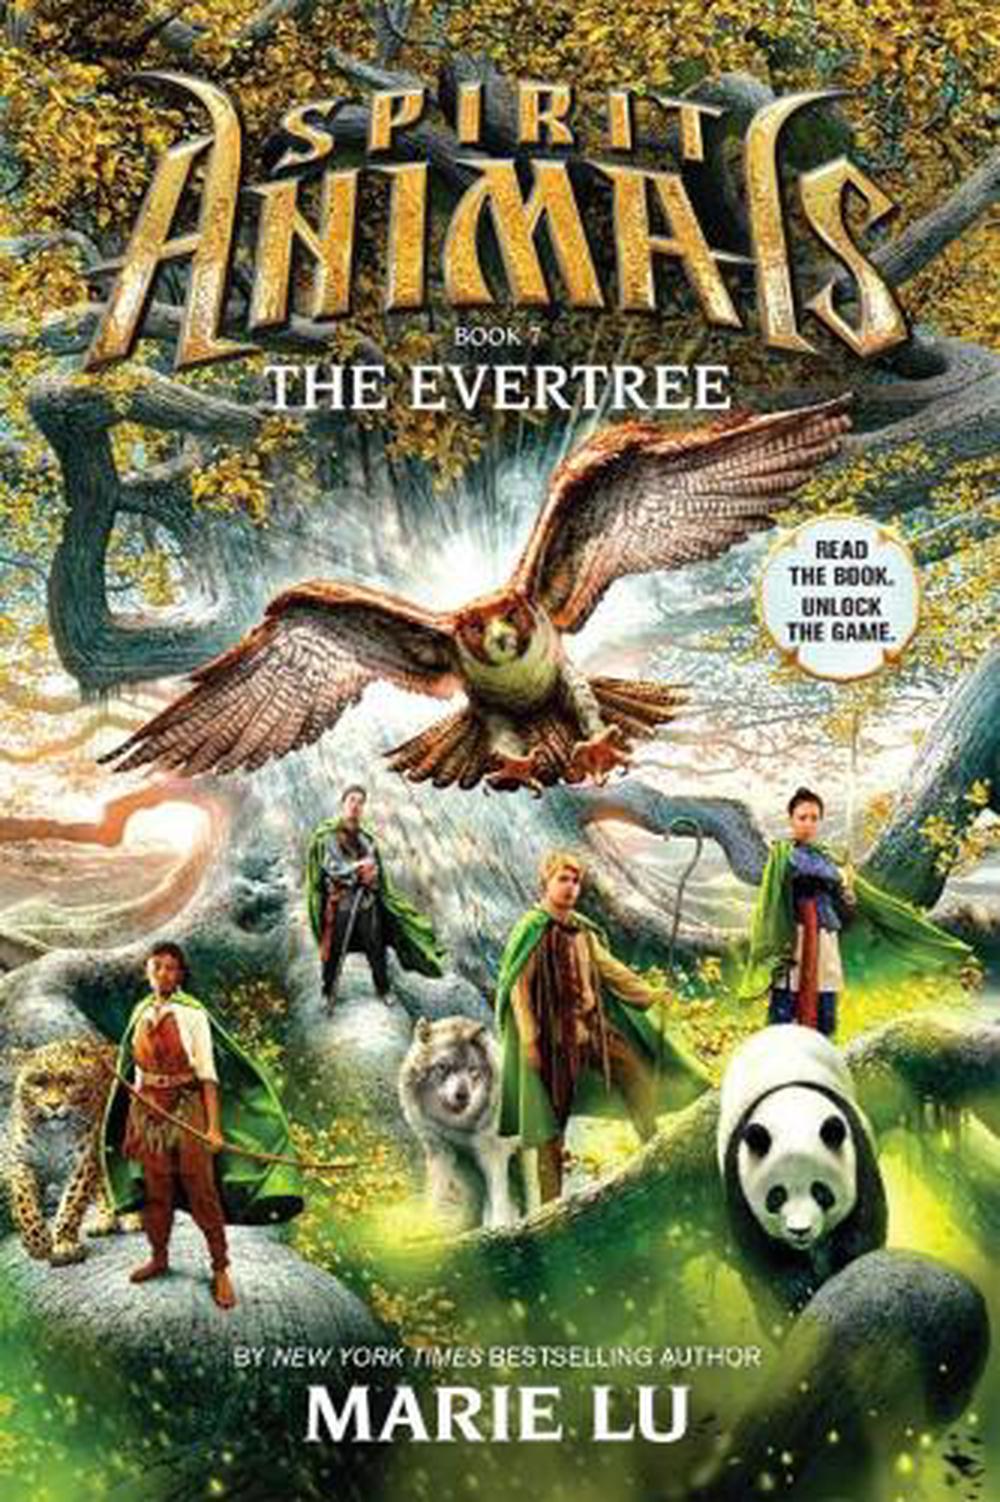 Spirit Animals Book 7: The Evertree by Marie Lu, Hardcover, 9780545535212 |  Buy online at The Nile